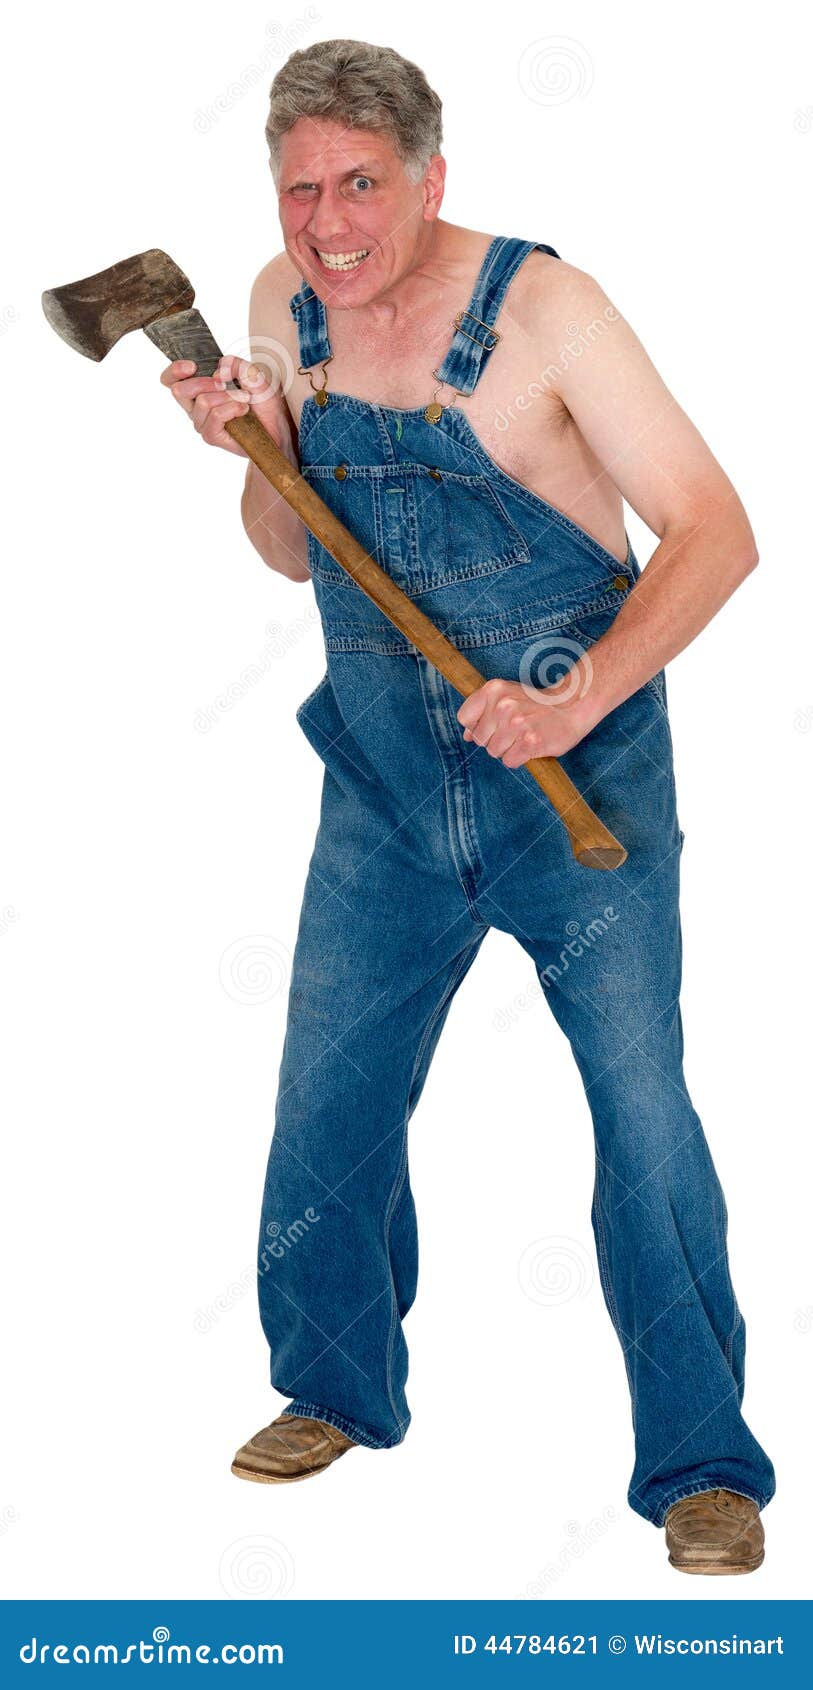 crazy-hick-hillybilly-axe-murder-halloween-murderer-isolated-hillbilly-plumb-loco-man-ready-to-commit-create-44784621.jpg